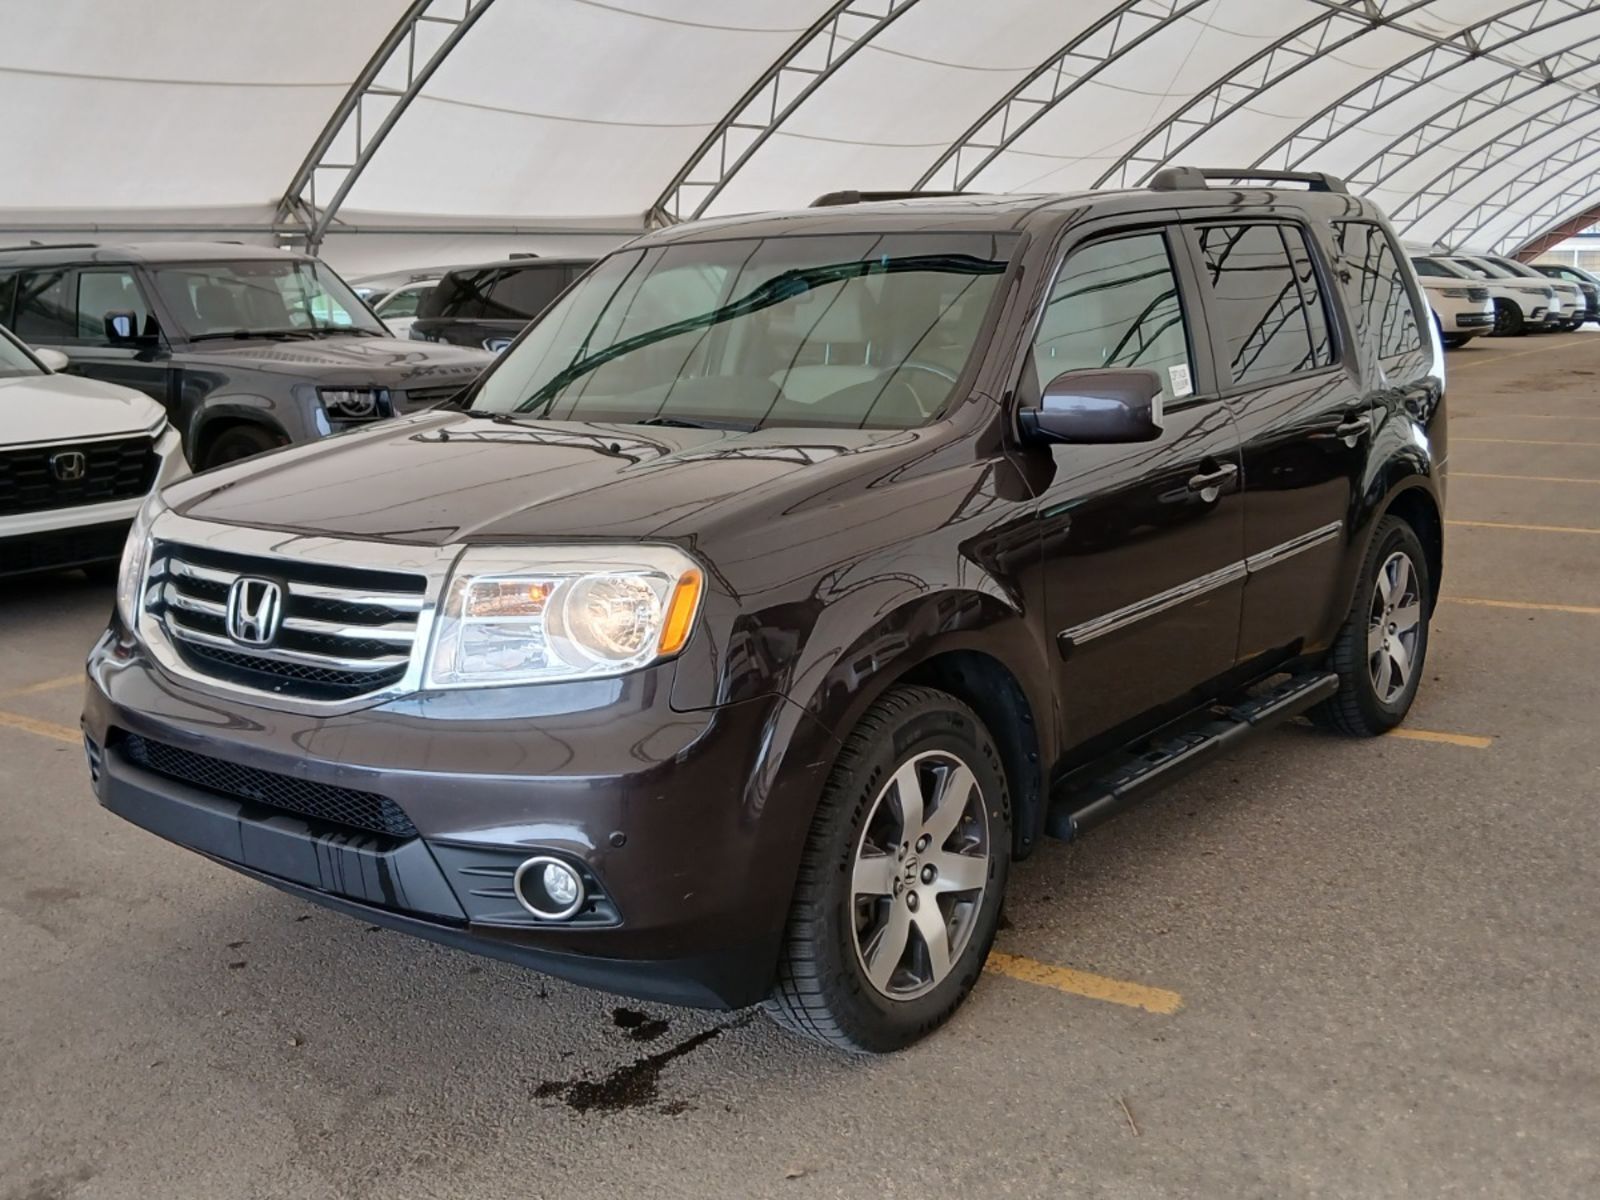 2012 Honda Pilot Touring - No Accidents | One Owner | Leather